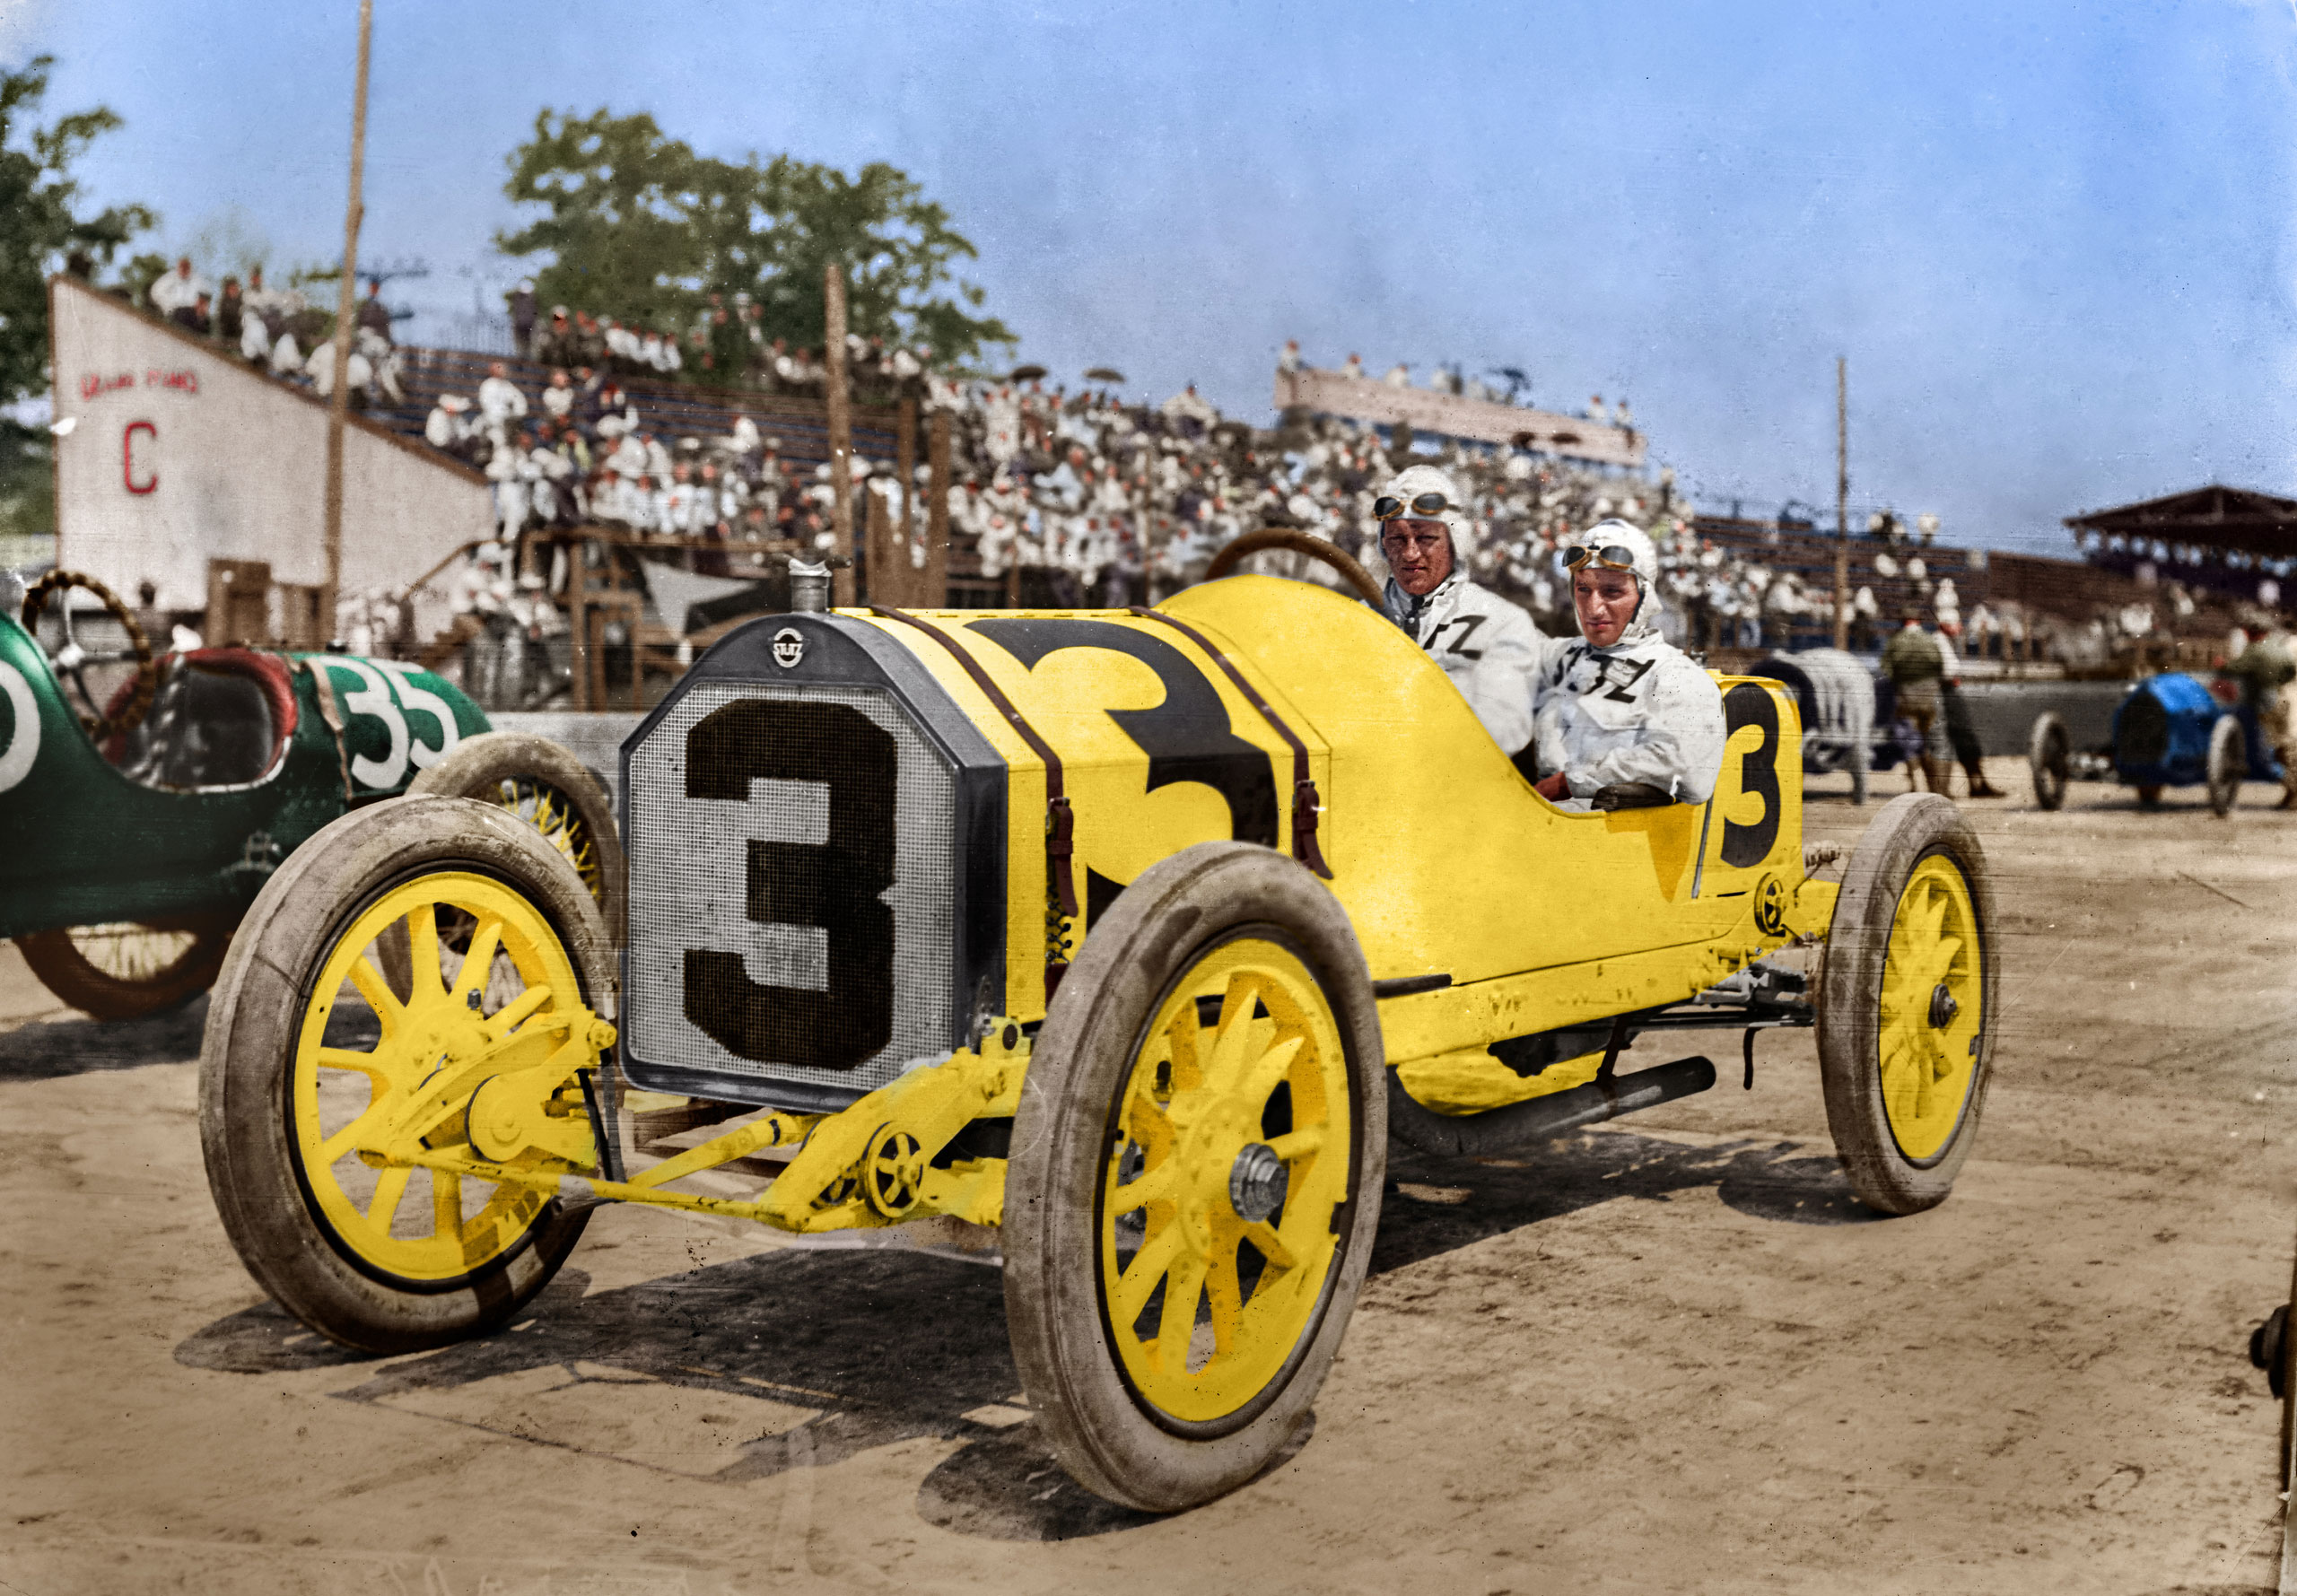 Gil Andersen of Norway with his riding mechanic aboard the #3 Stutz Motor Company Stutz Bearcat racer before the start of the third running of the Indianapolis 500 Mile Race on May 30, 1913 at the Indianapolis Motor Speedway.